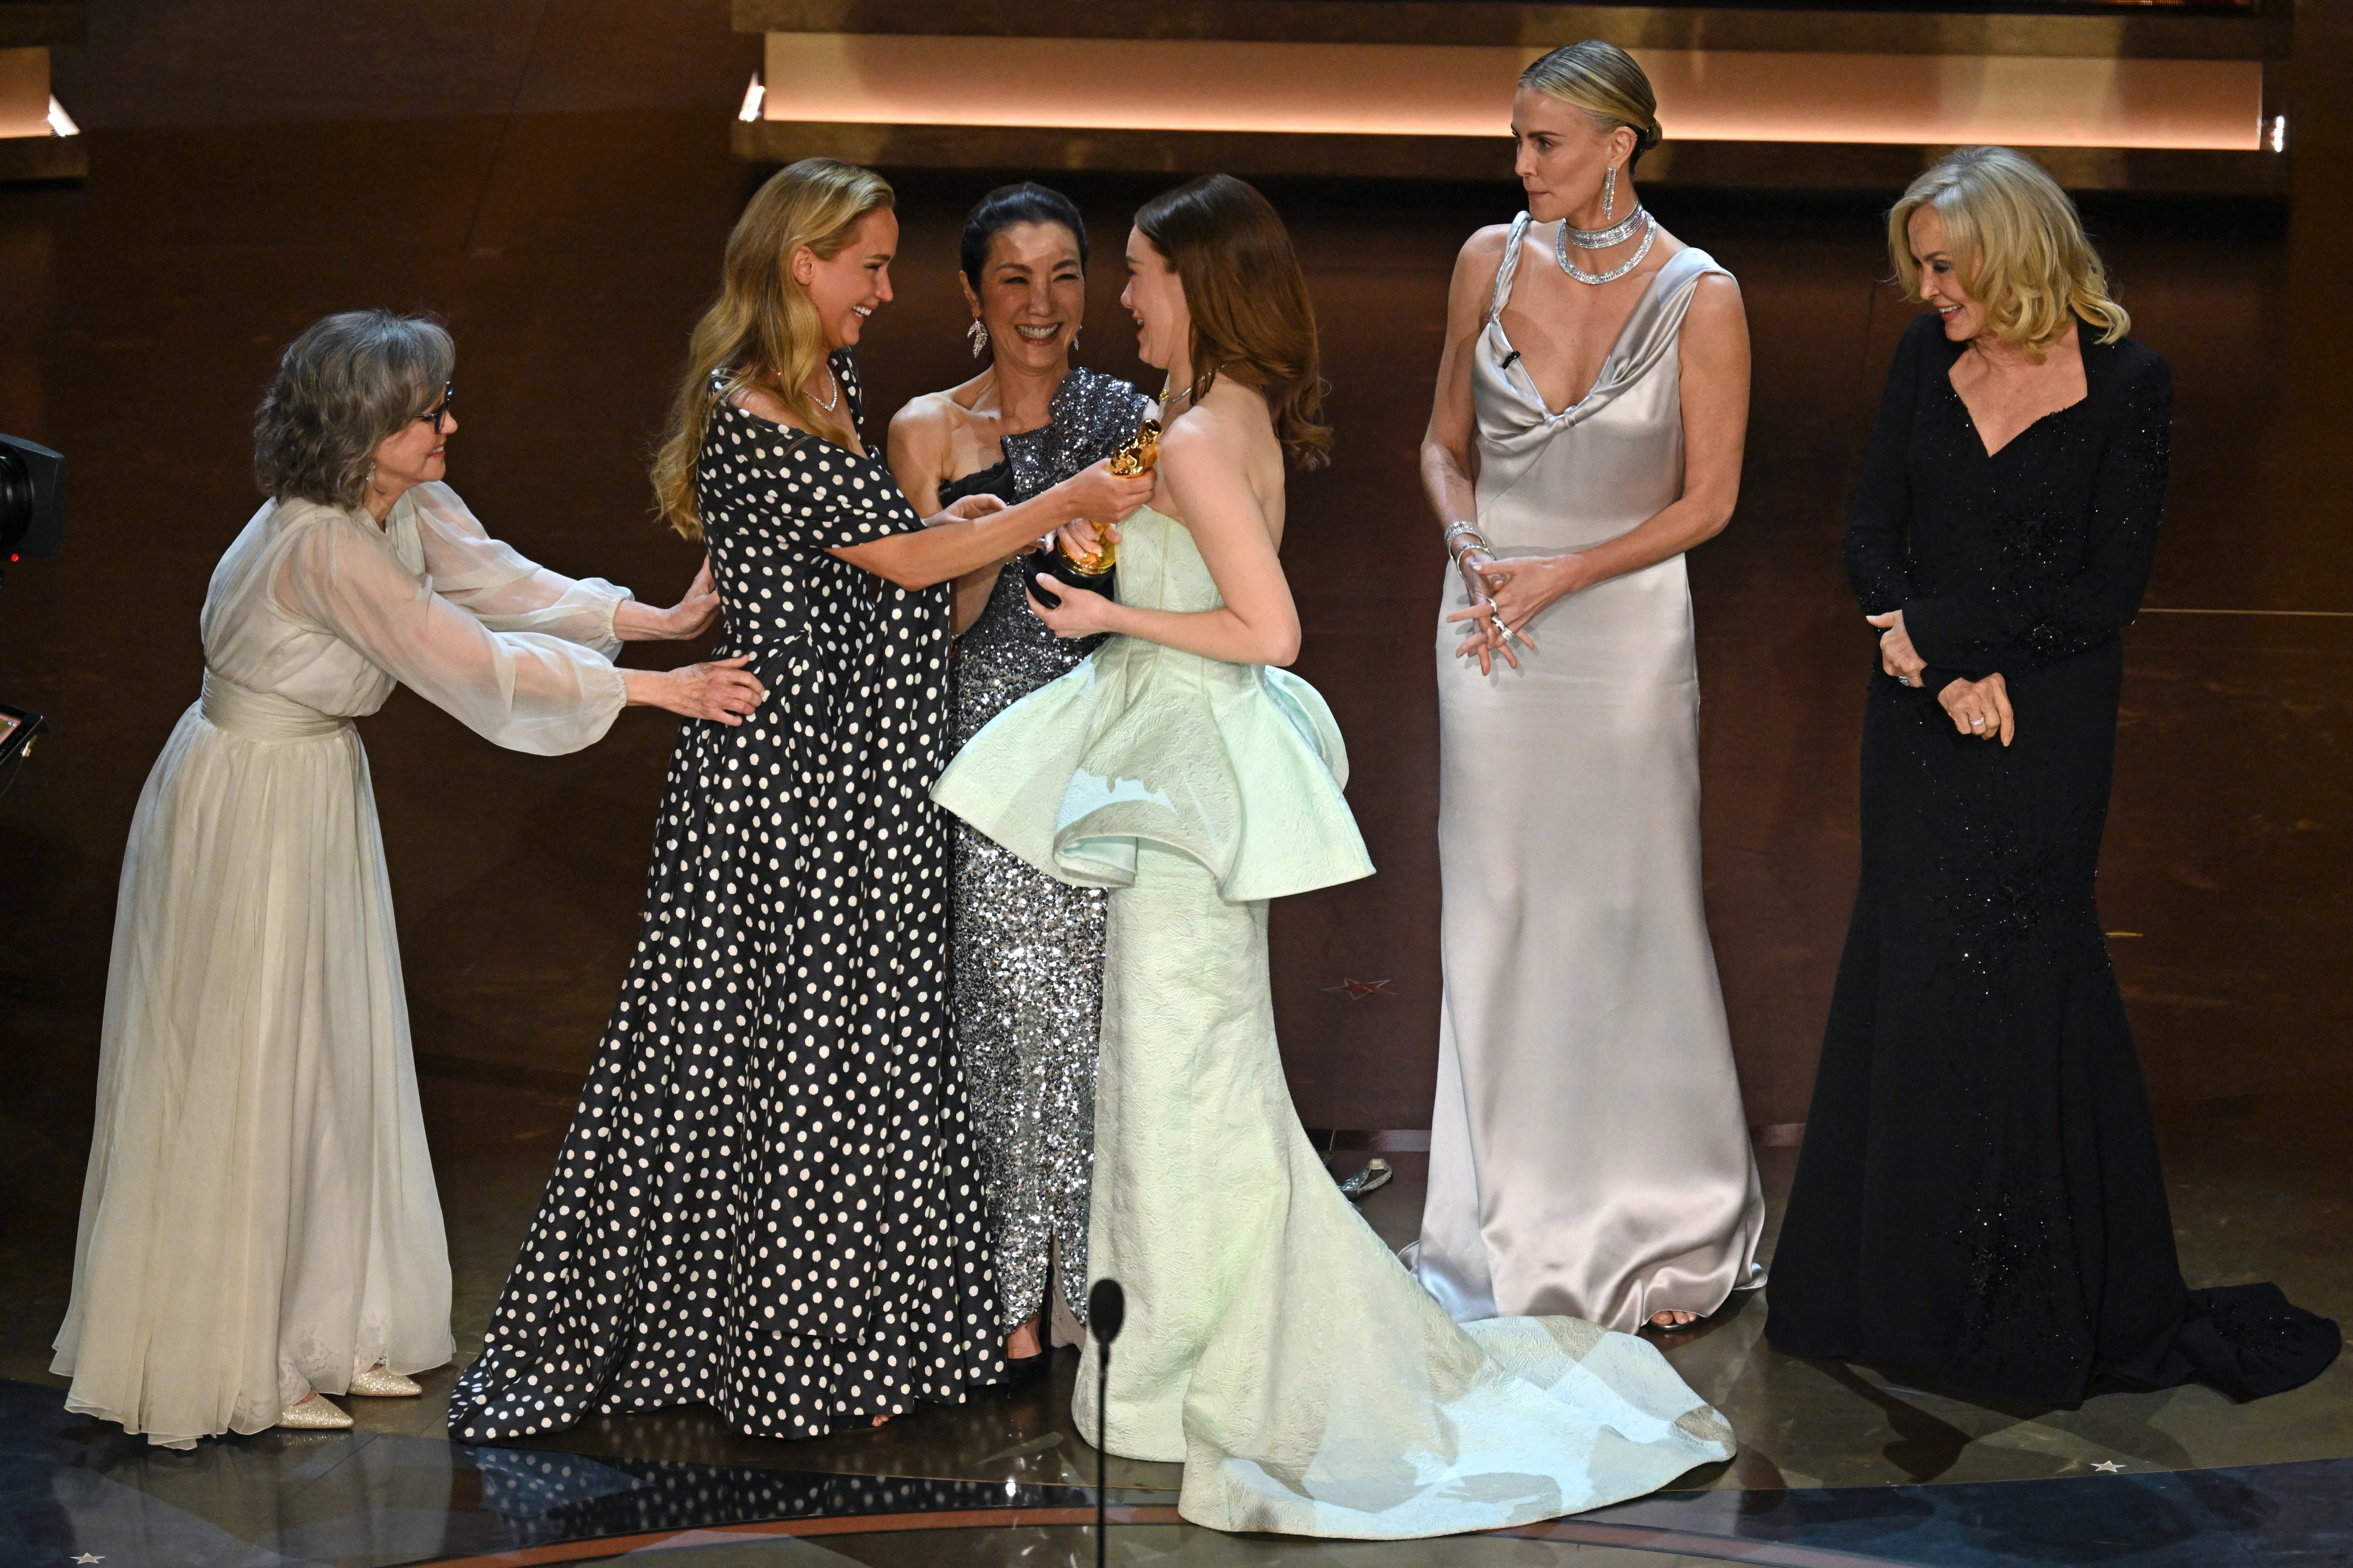 Emma Stone accepting her Oscar the other five past winners